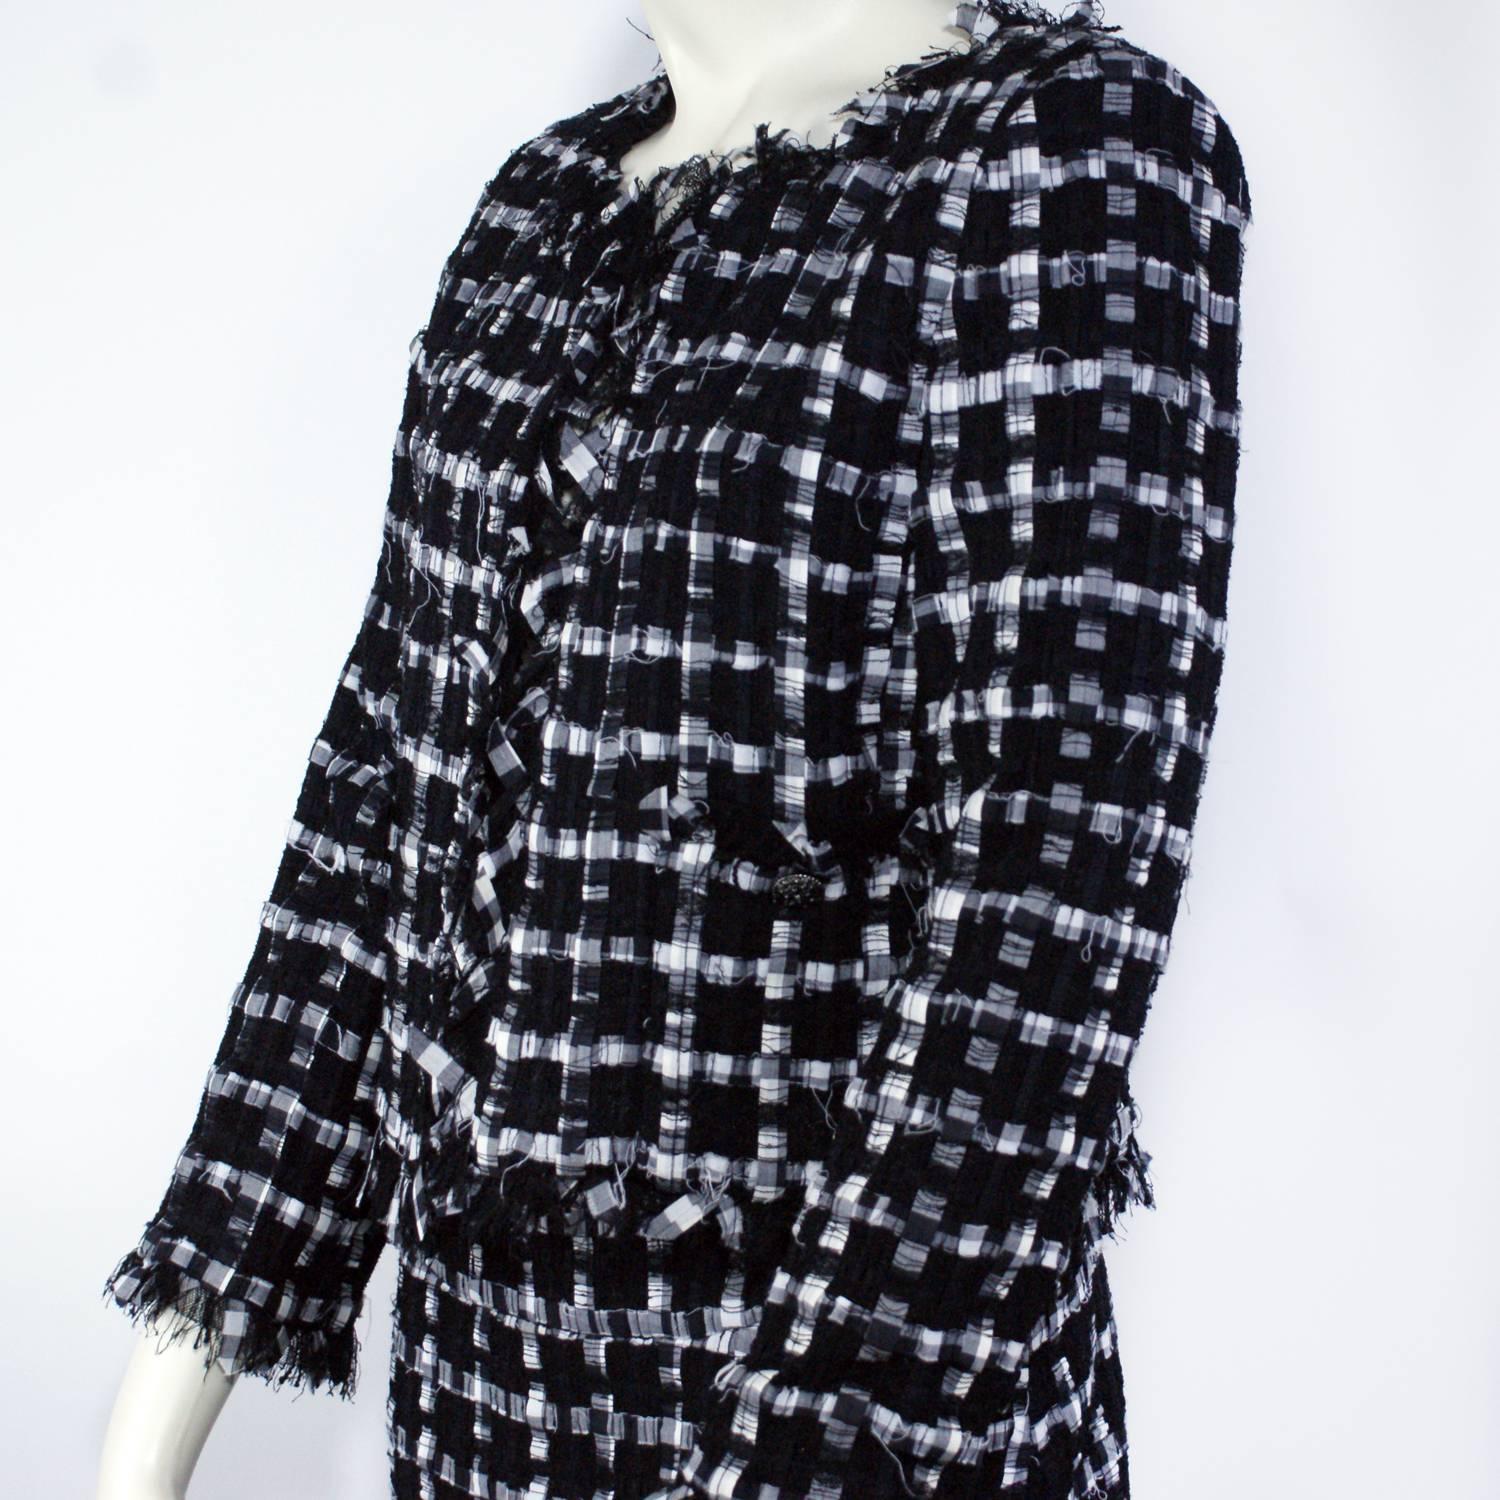 Black and white woven ribbon design
Open style jacket with two pockets and decorative buttons
Single pleat design on the skirt
Ribbons fringe detail at the trim
Size 38 
